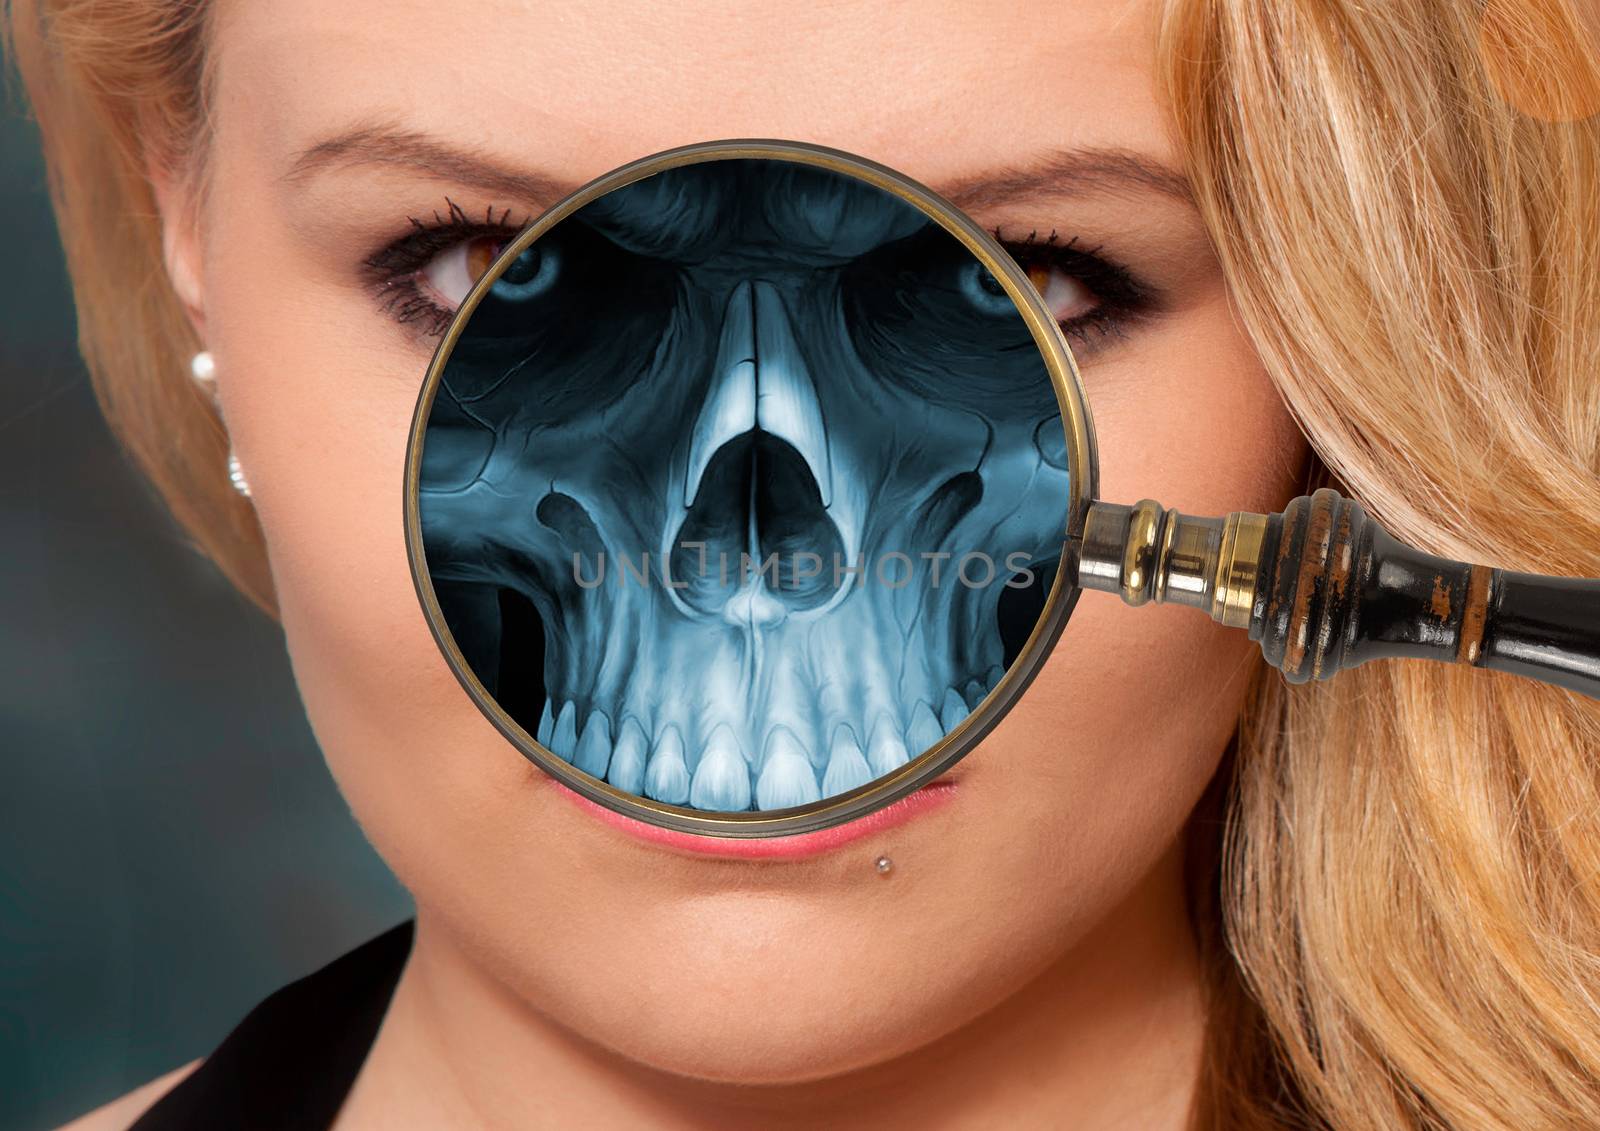 The X-rays of individual areas of a human face